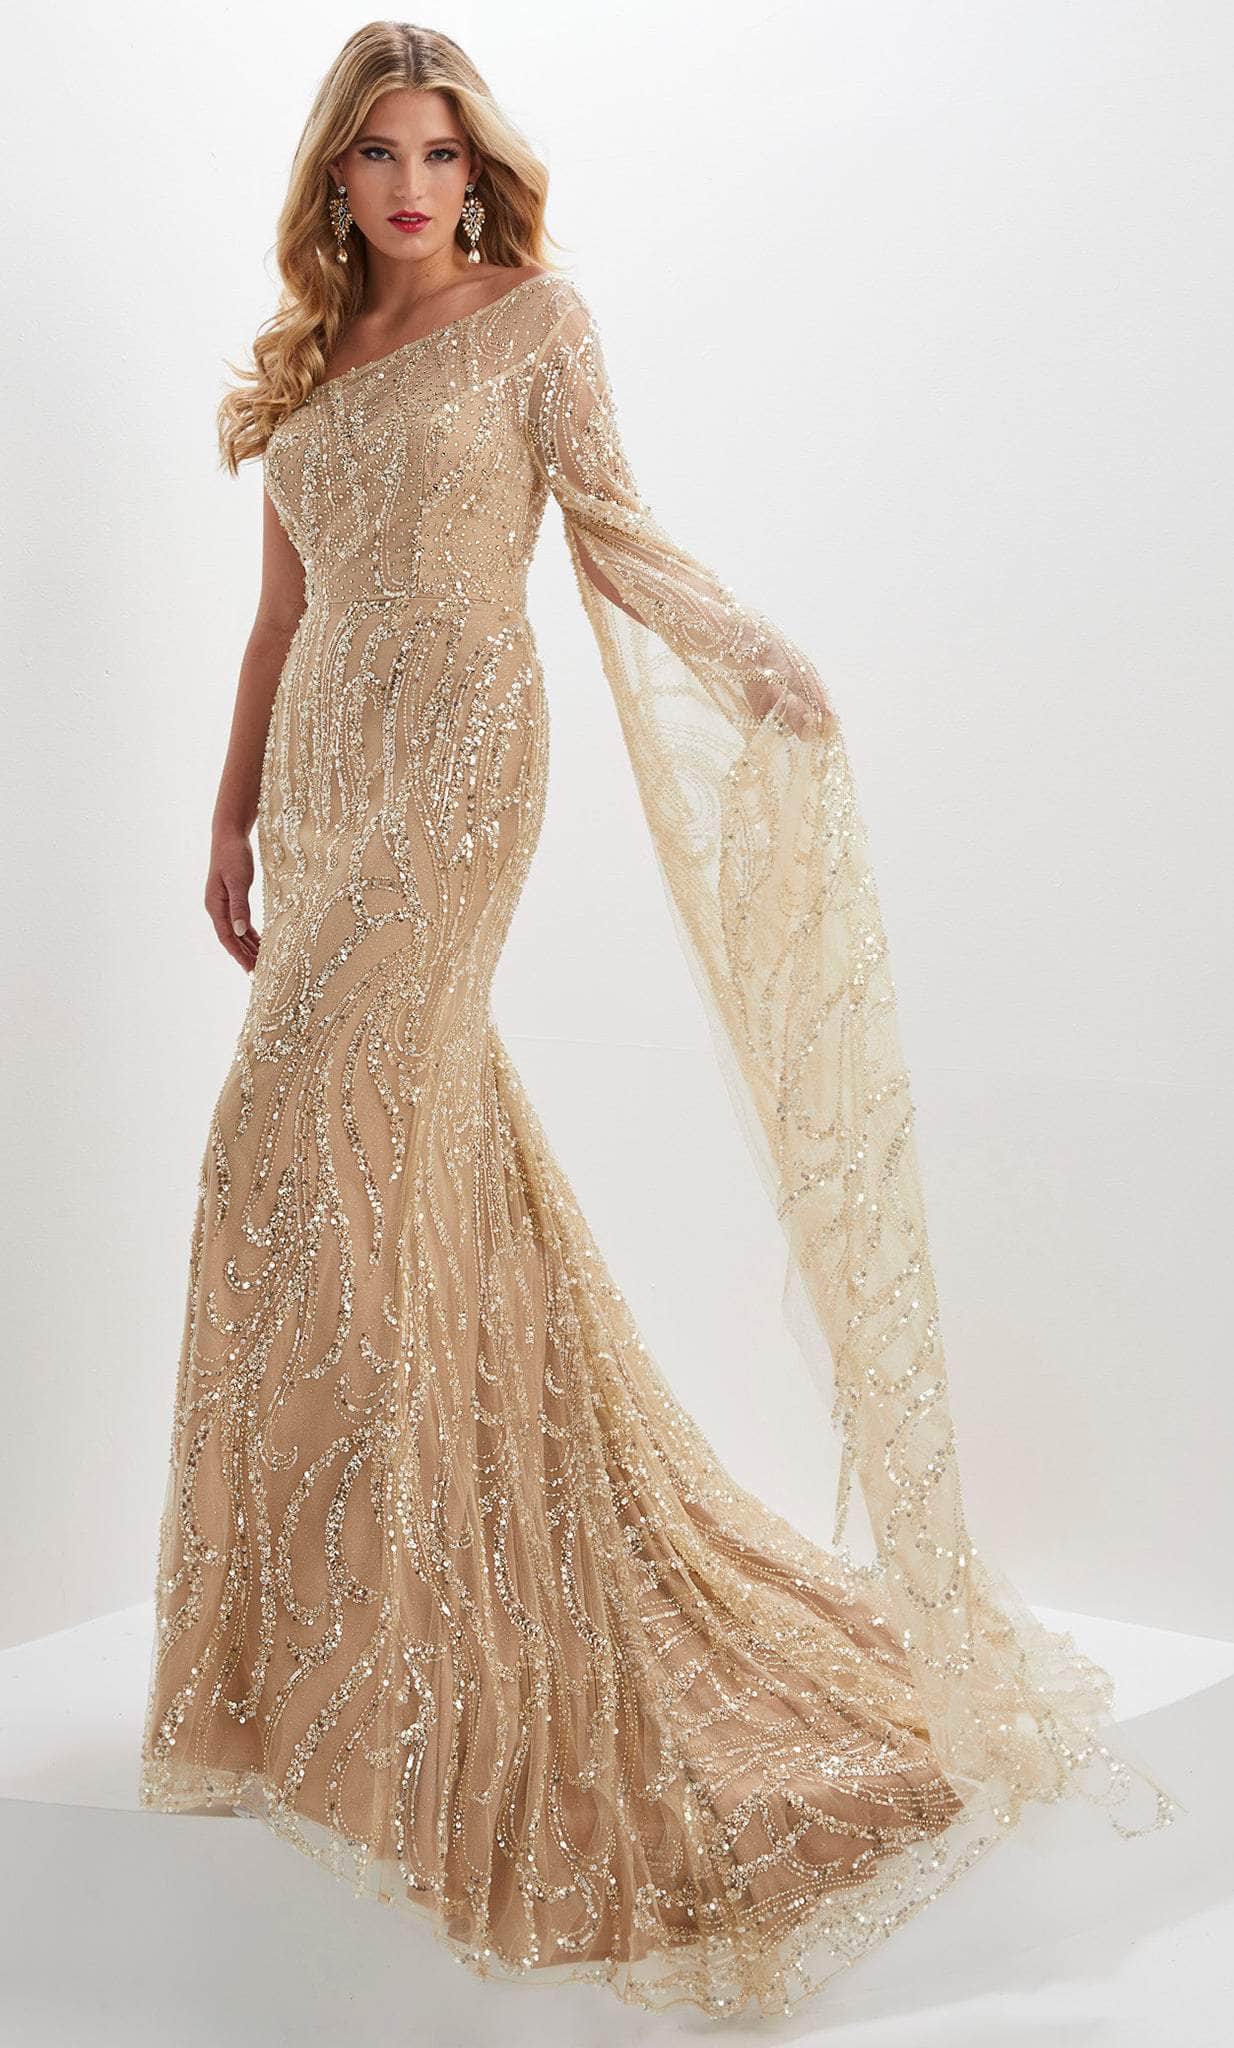 Image of Panoply 14121 - Flutter Sleeve Beaded Evening Gown